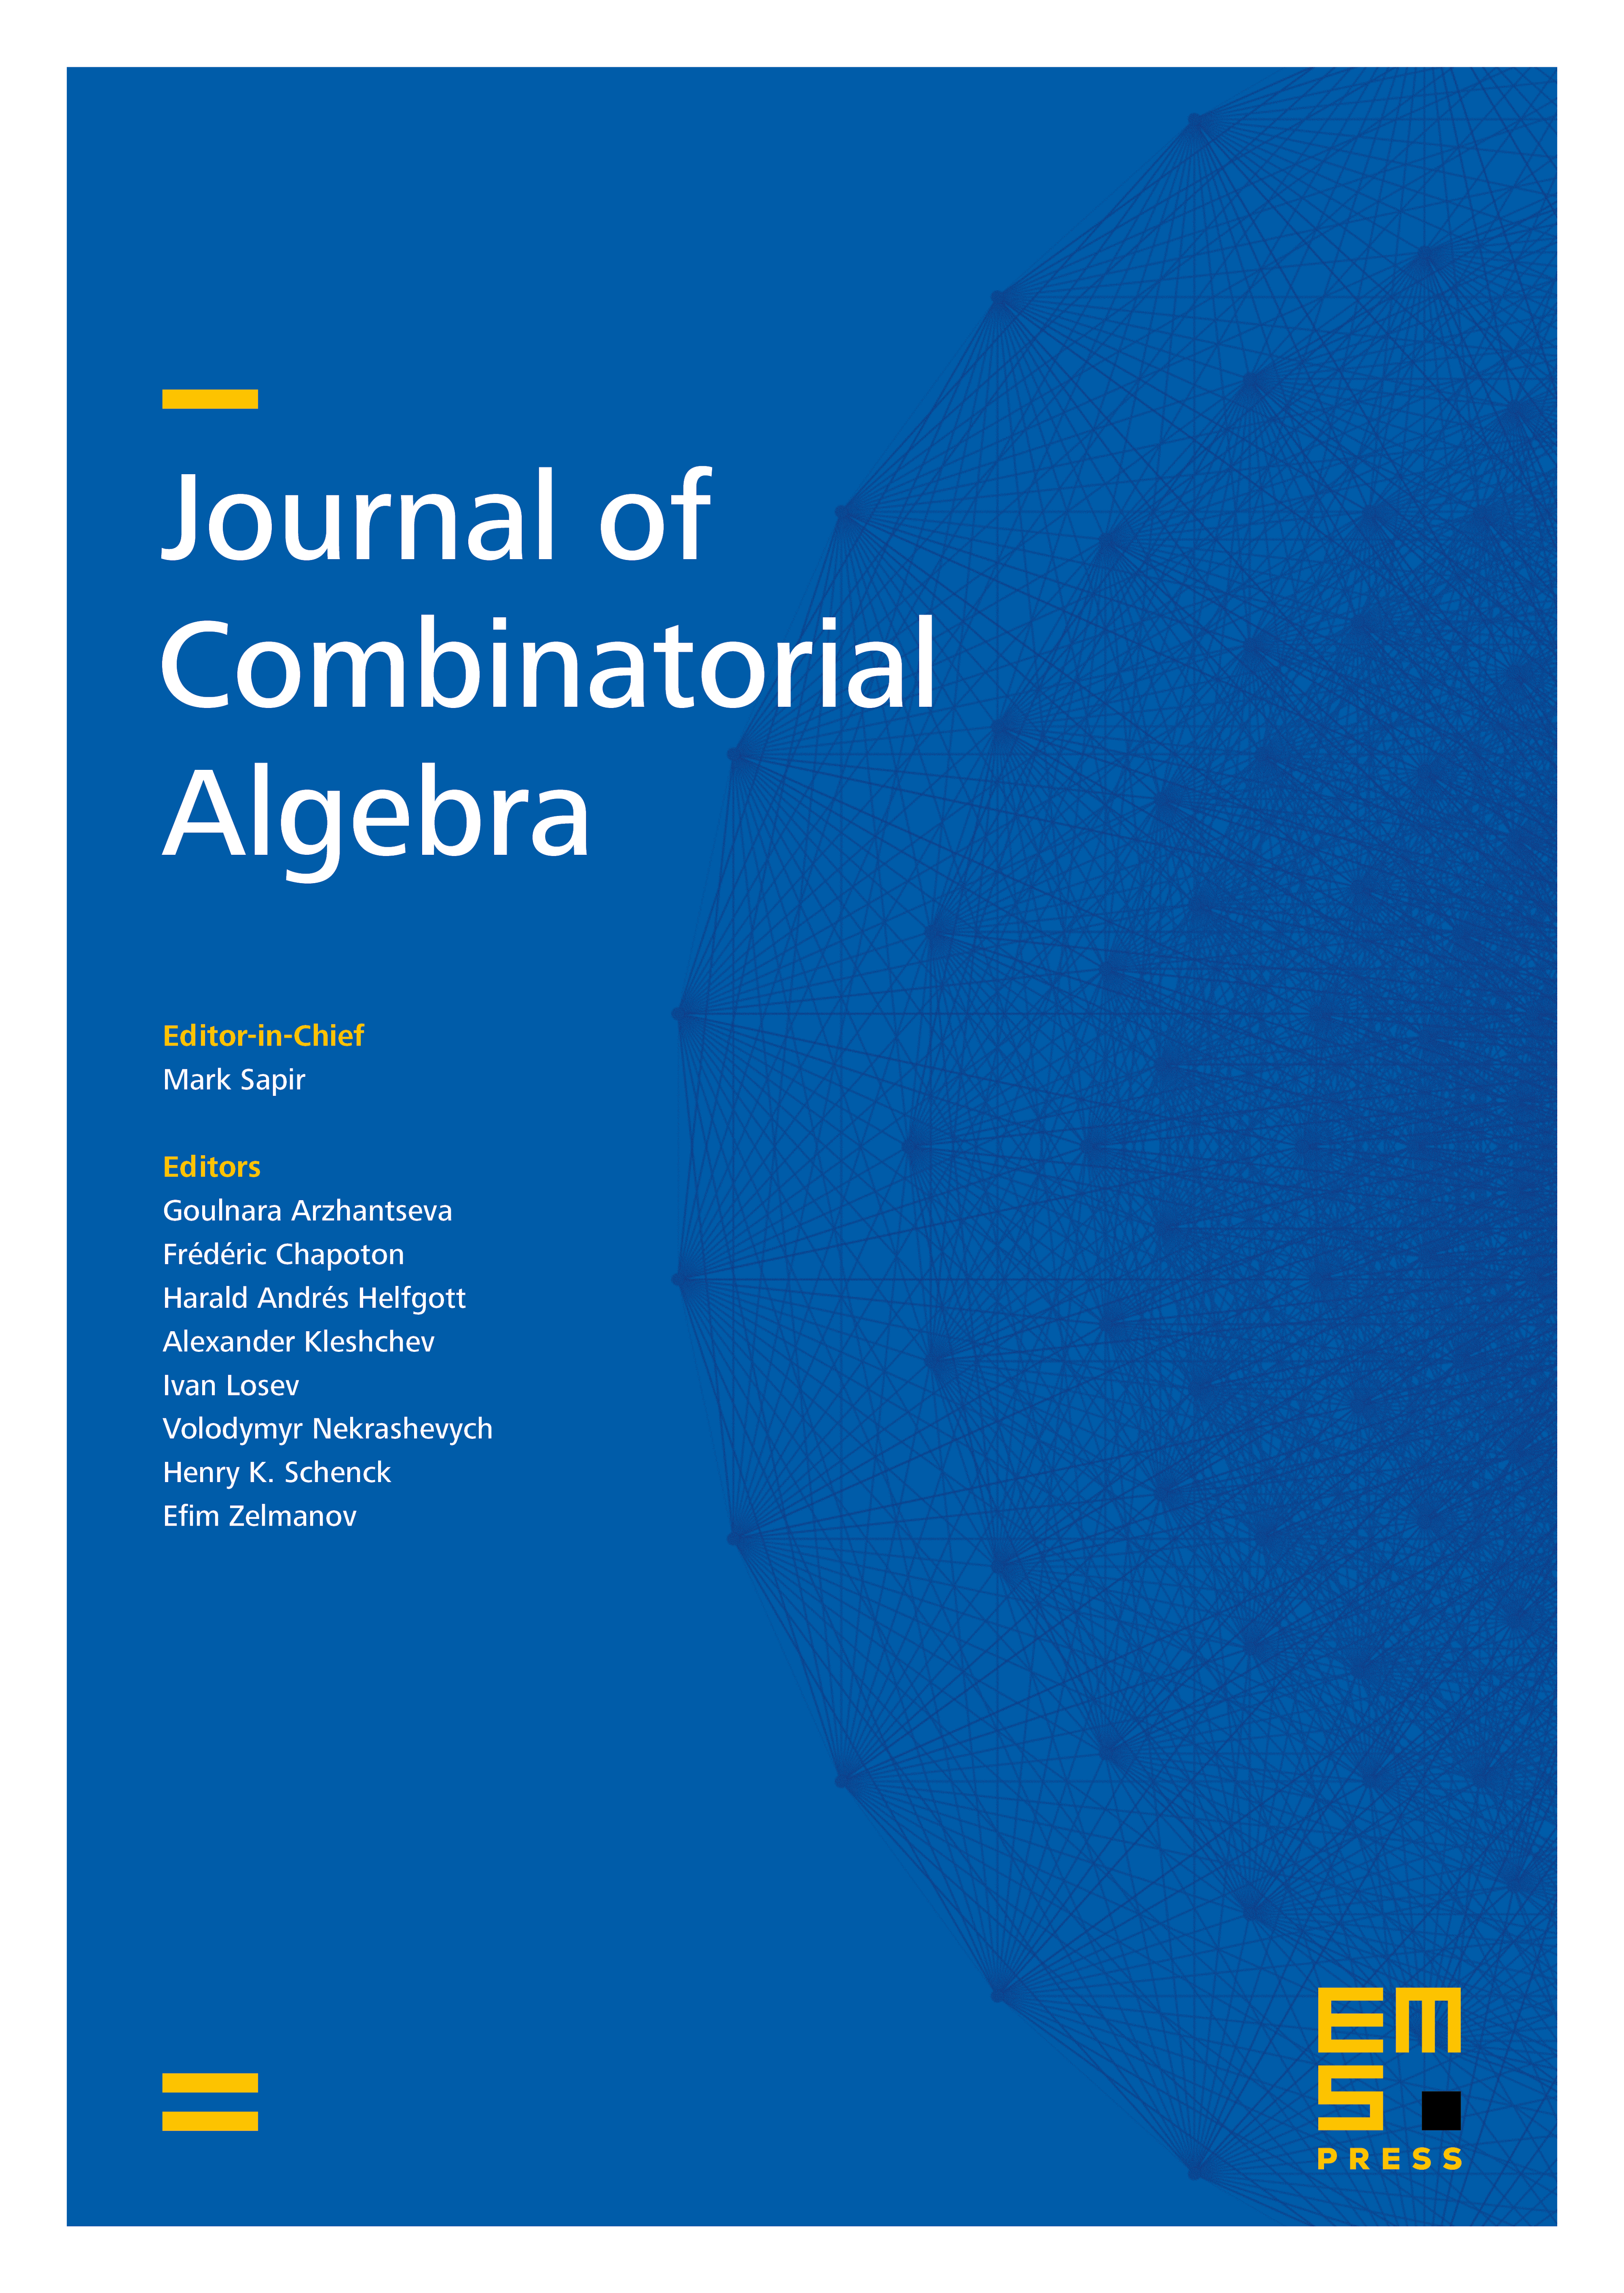 Cellular subalgebras of the partition algebra cover